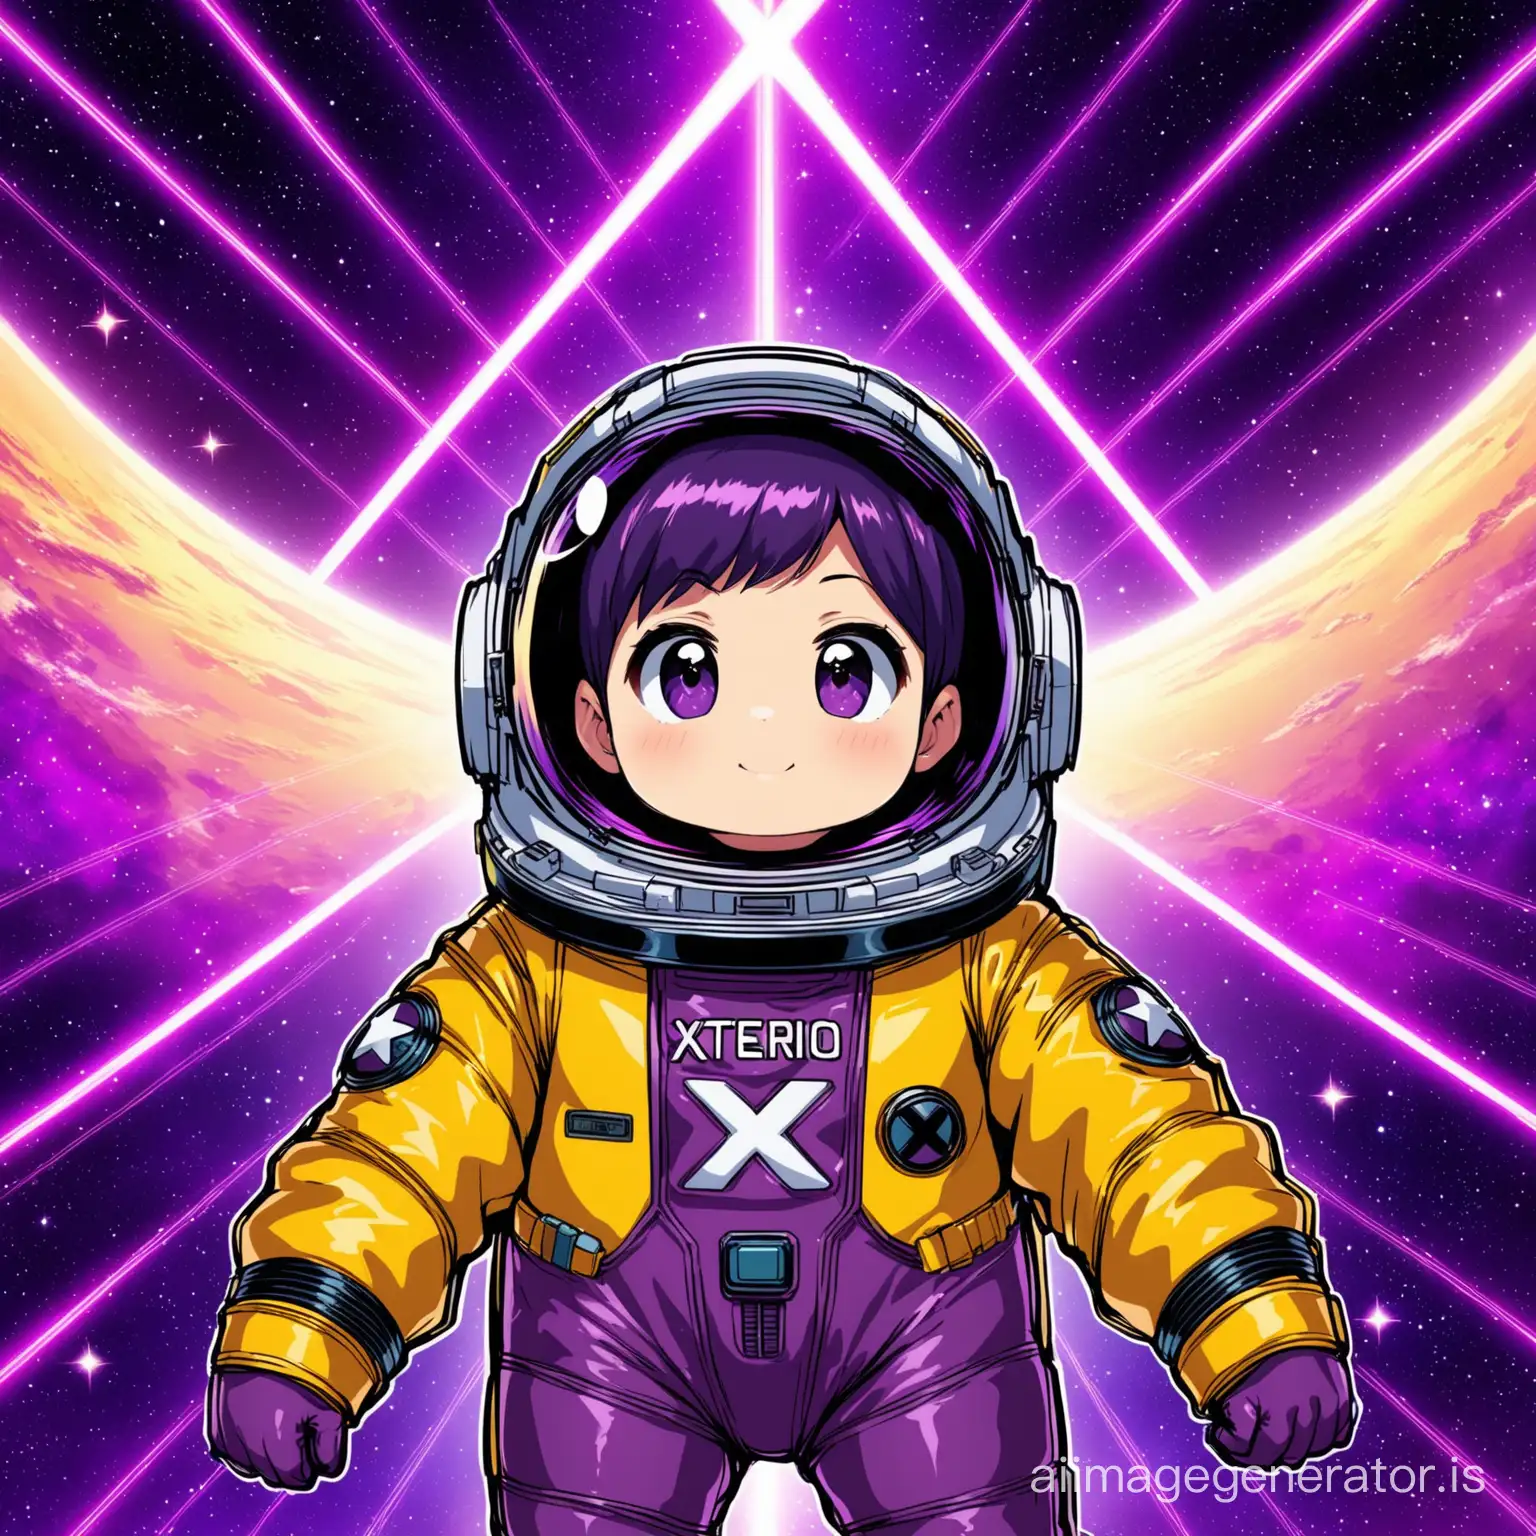 I see a purple space with stars
A "xterio" text in background
Also cute xmen with Spacesuit 
Details are very high quality